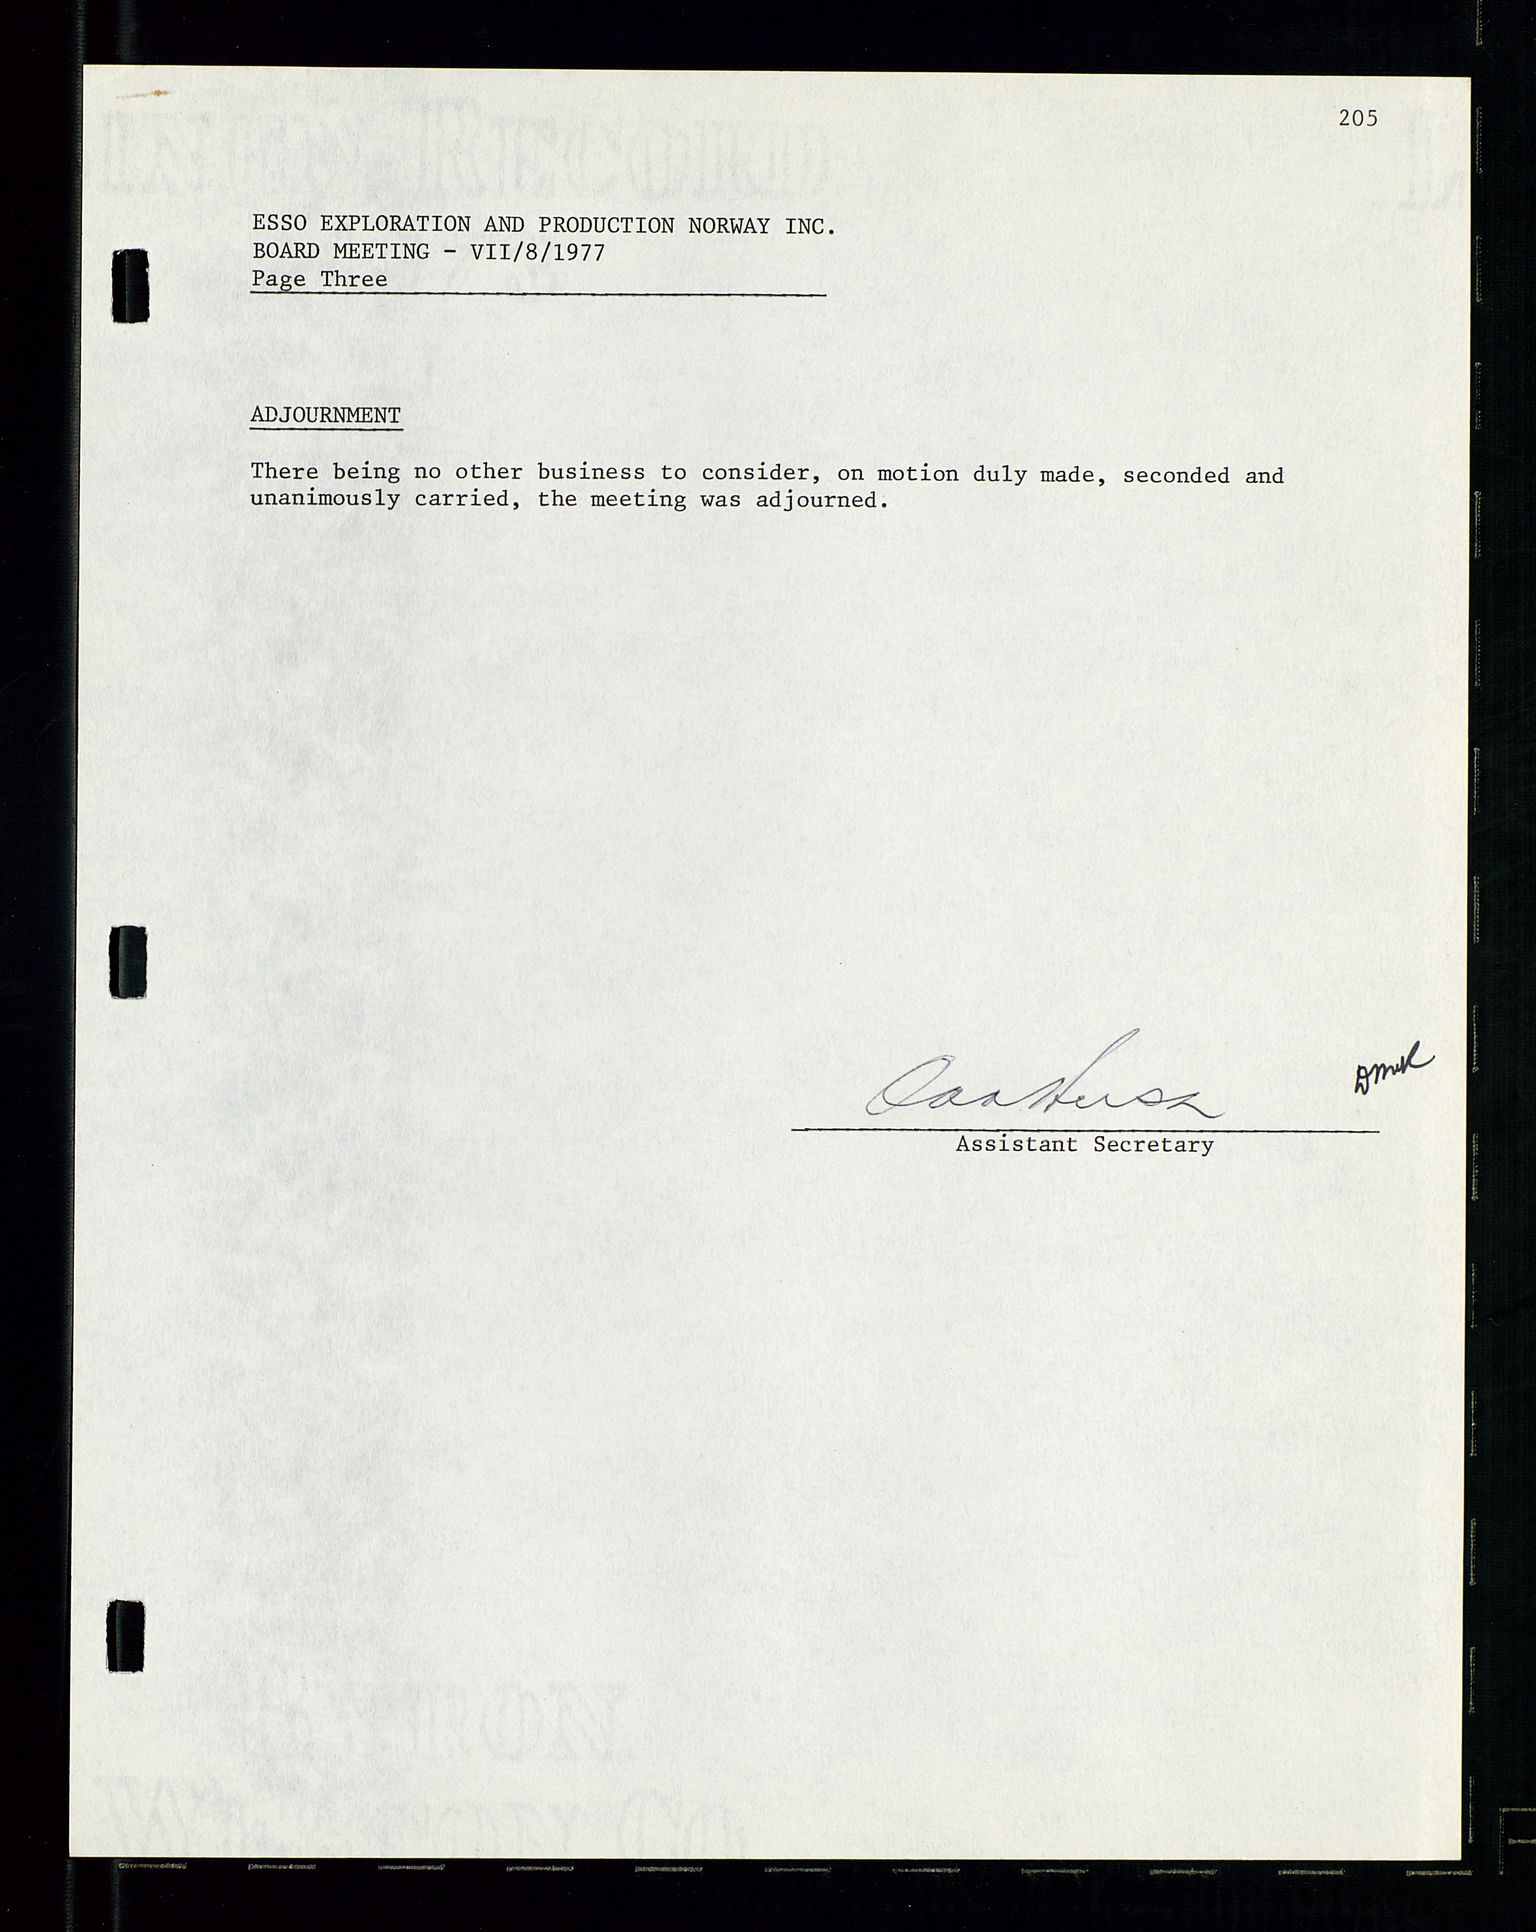 Pa 1512 - Esso Exploration and Production Norway Inc., SAST/A-101917/A/Aa/L0001/0002: Styredokumenter / Corporate records, Board meeting minutes, Agreements, Stocholder meetings, 1975-1979, s. 56